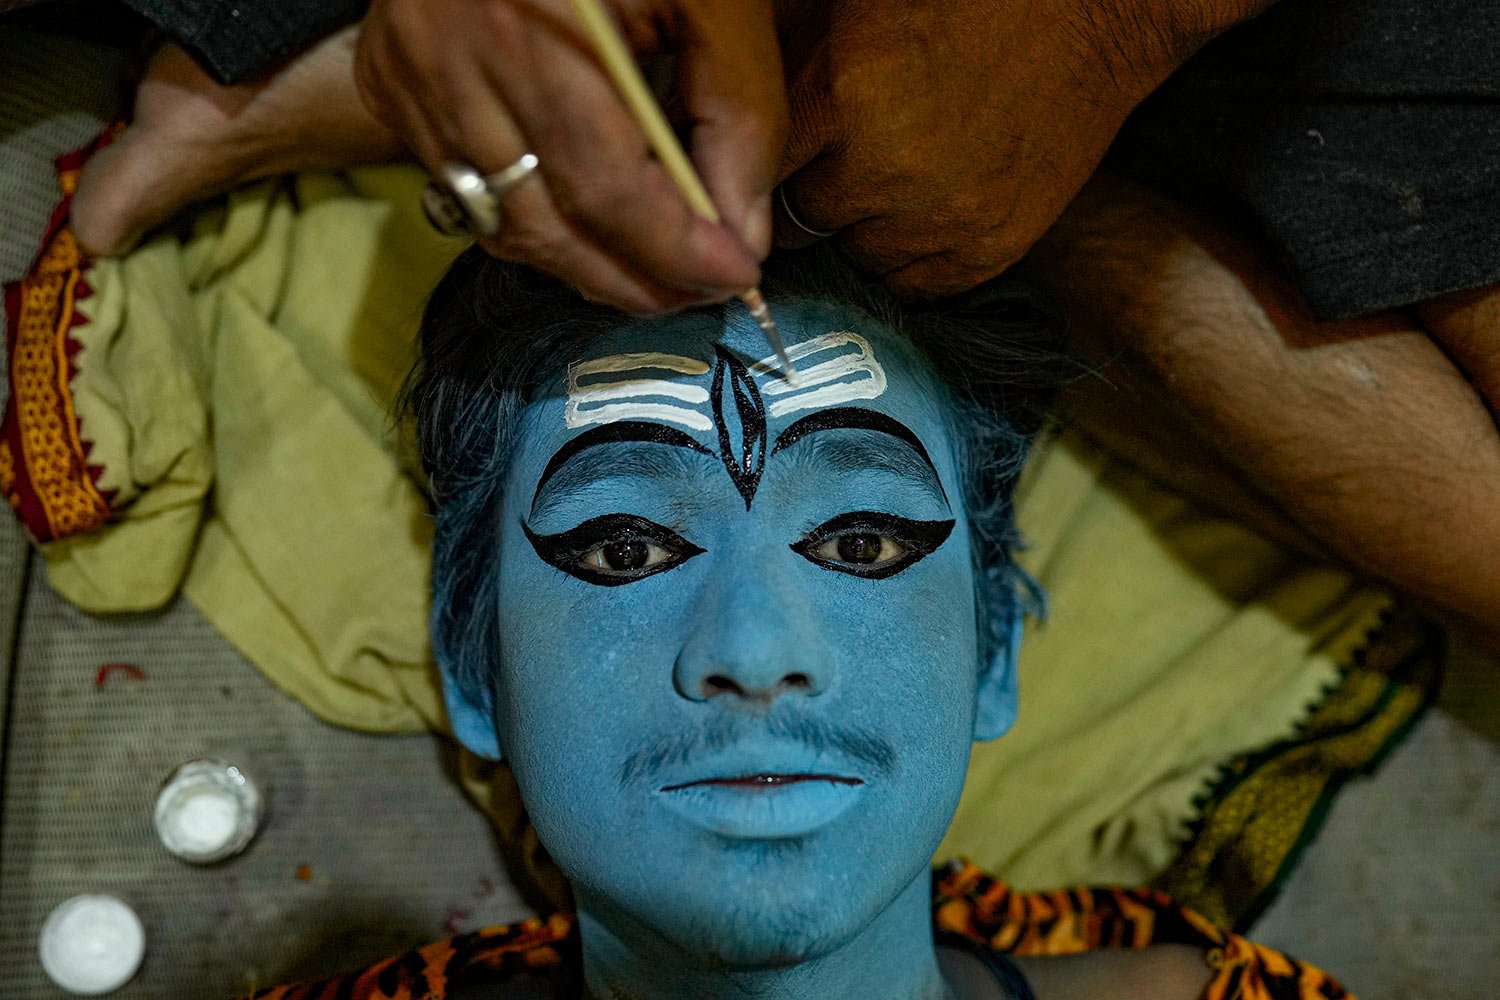  An artist is prepared for a religious procession during Dussehra festival in Prayagraj, India, Thursday, Oct. 19, 2019. (AP Photo/Rajesh Kumar Singh) 